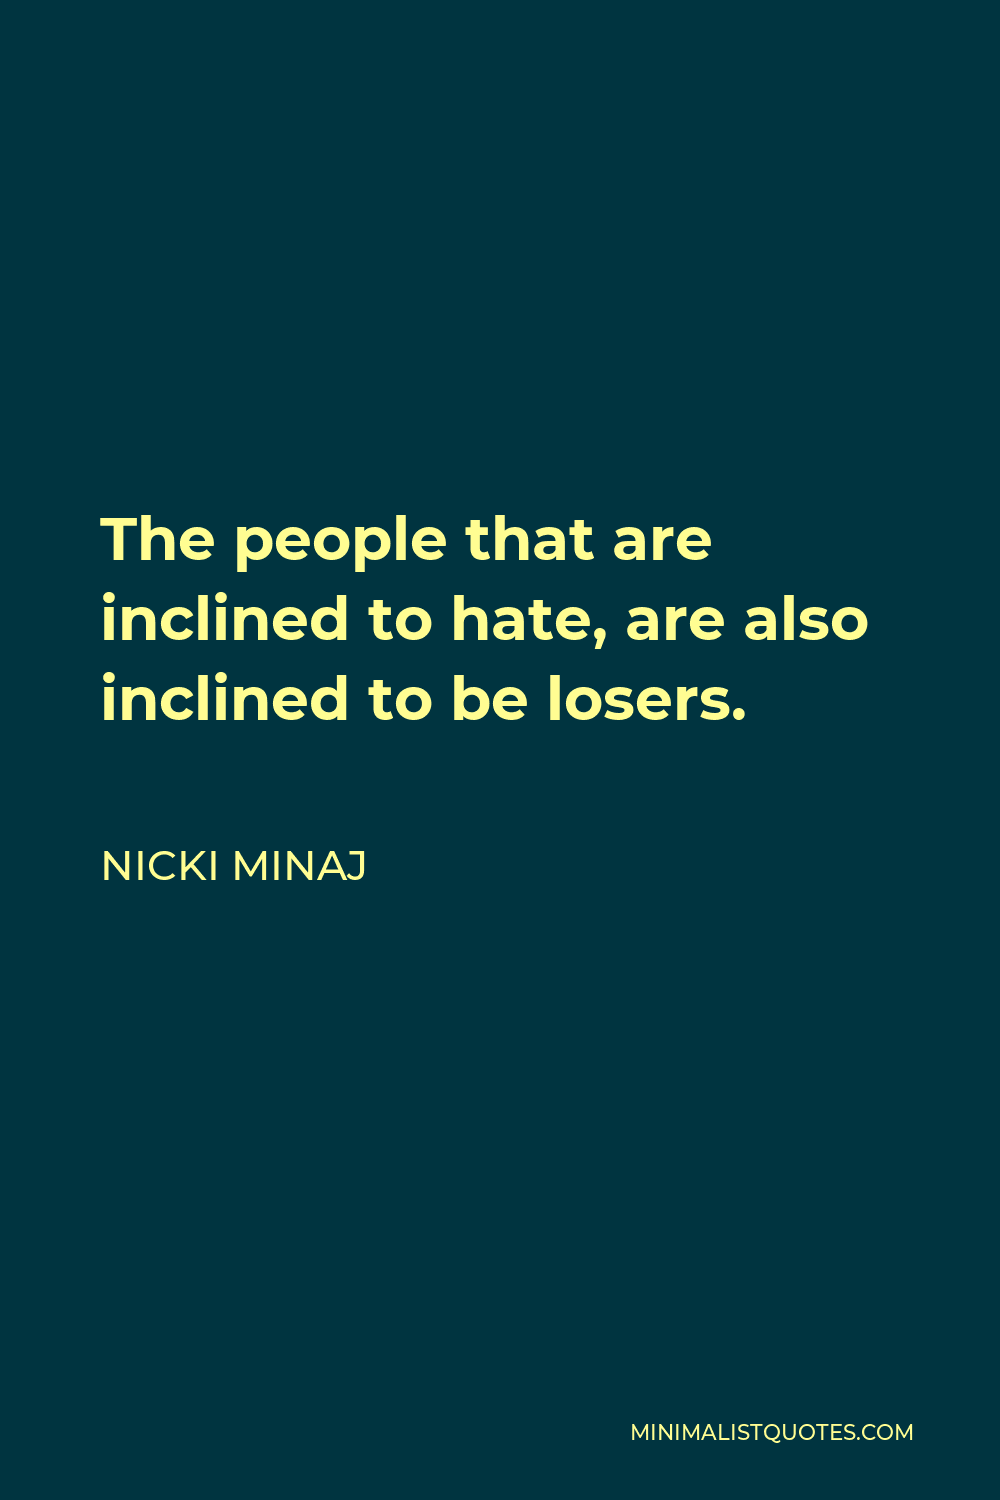 Nicki Minaj Quote: The people that are inclined to hate, are also